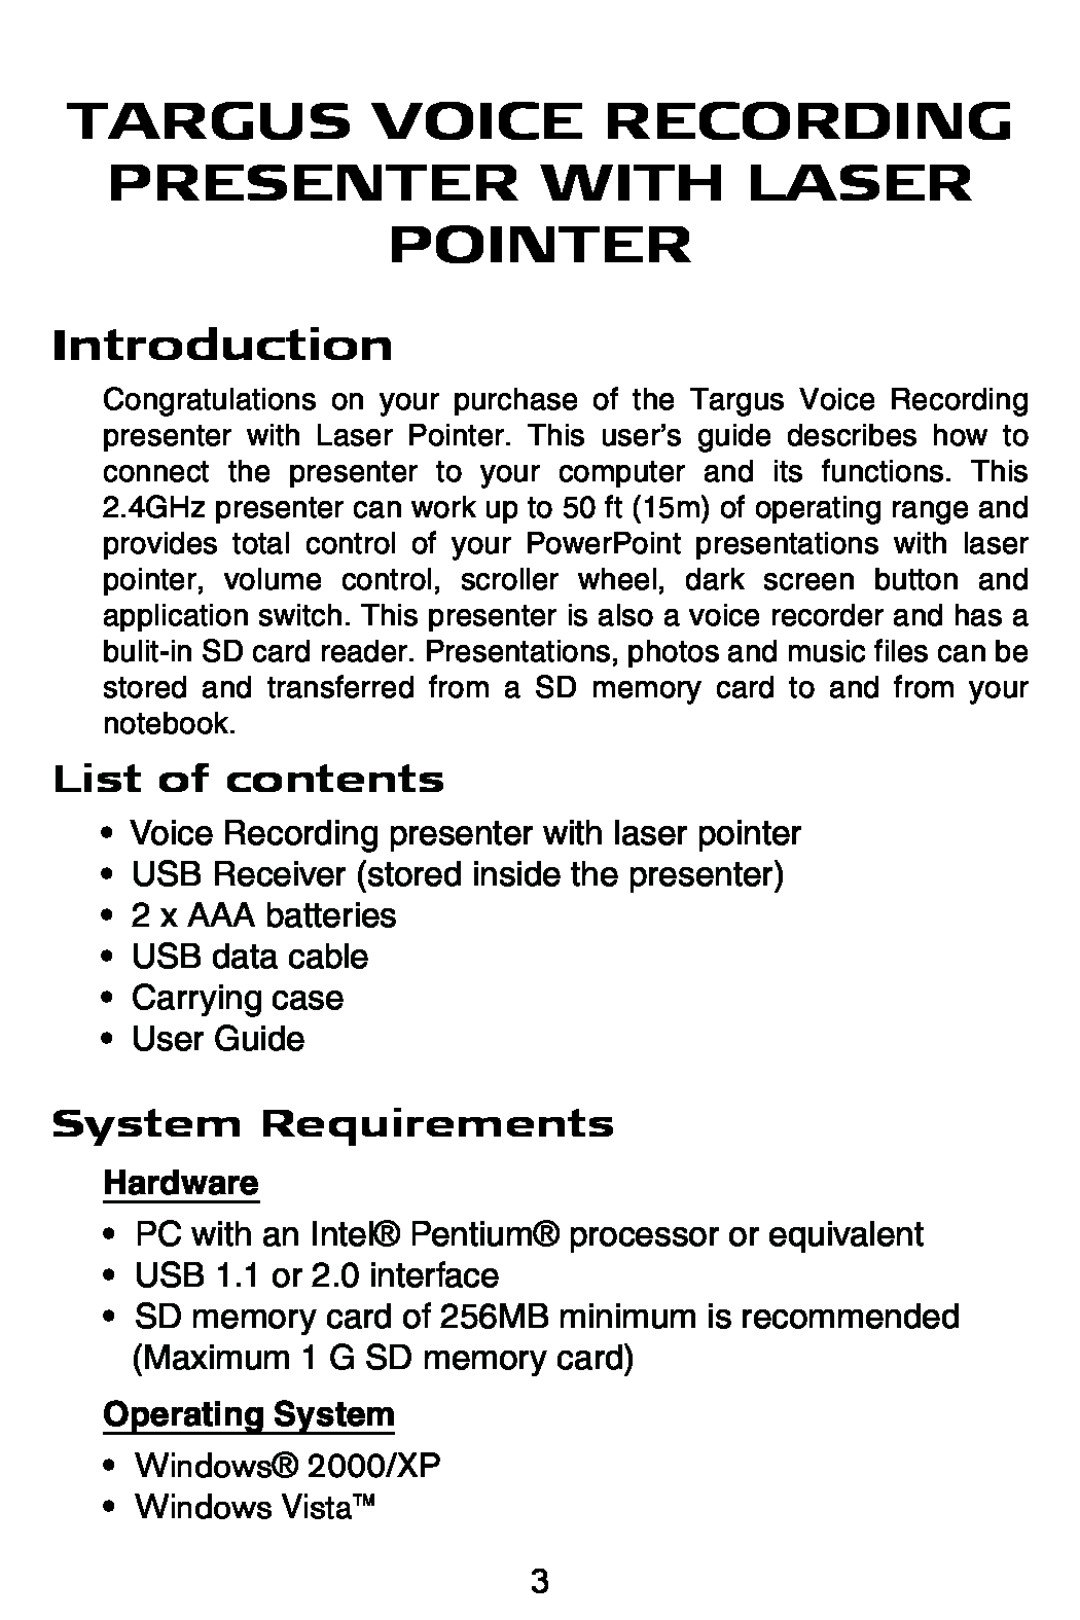 Targus AMP05US Introduction, List of contents, System Requirements, Hardware, Operating System, USB 1.1 or 2.0 interface 